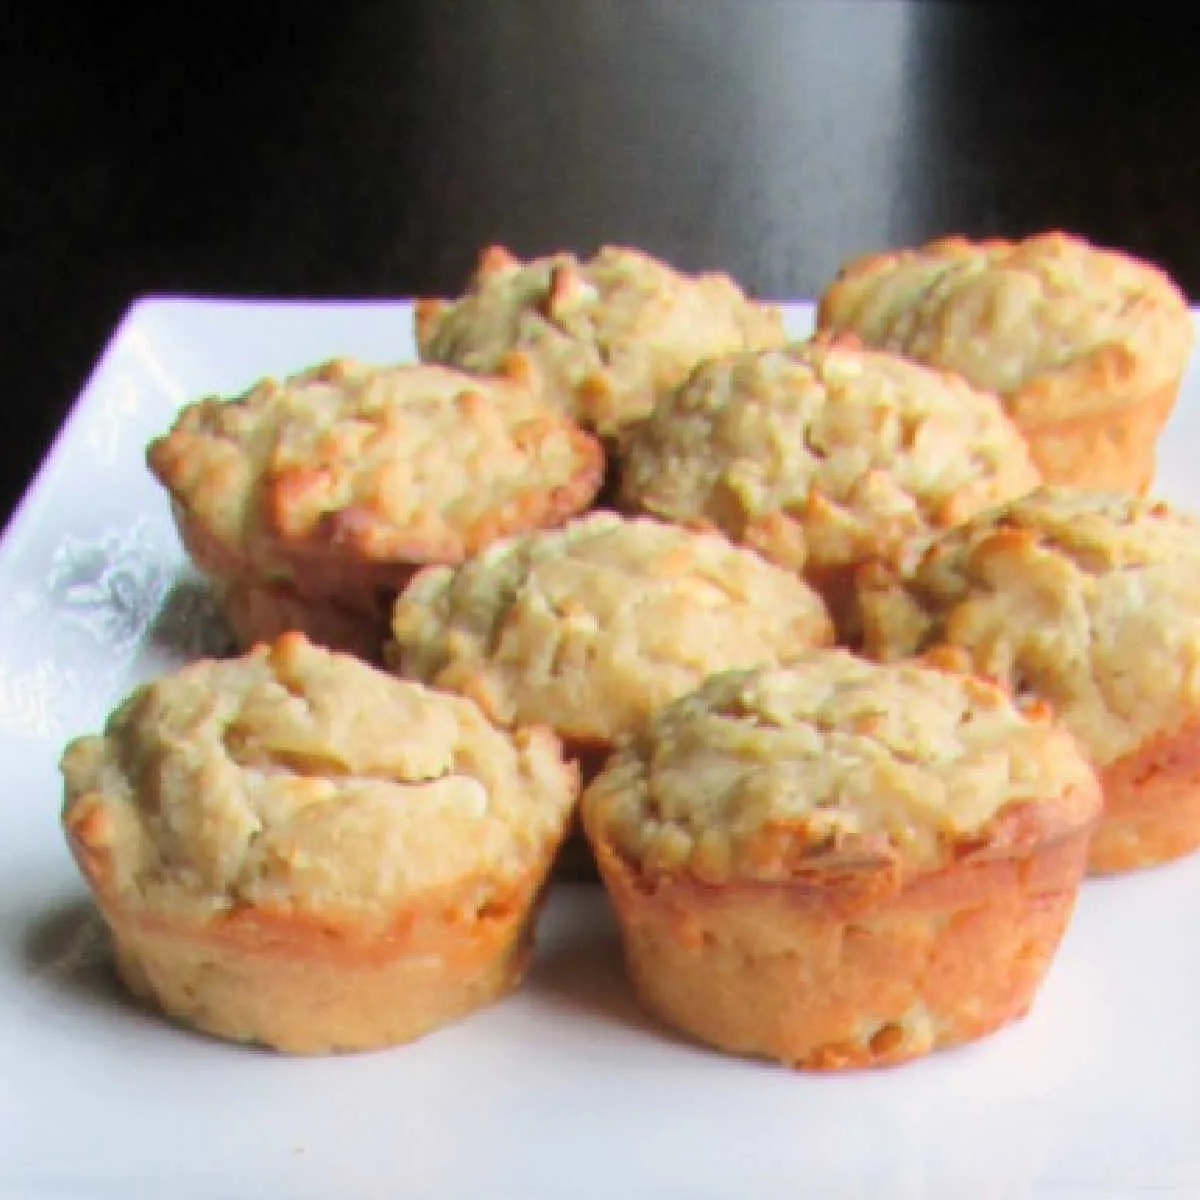 plate of orange sourdough muffins with white chocolate chips.